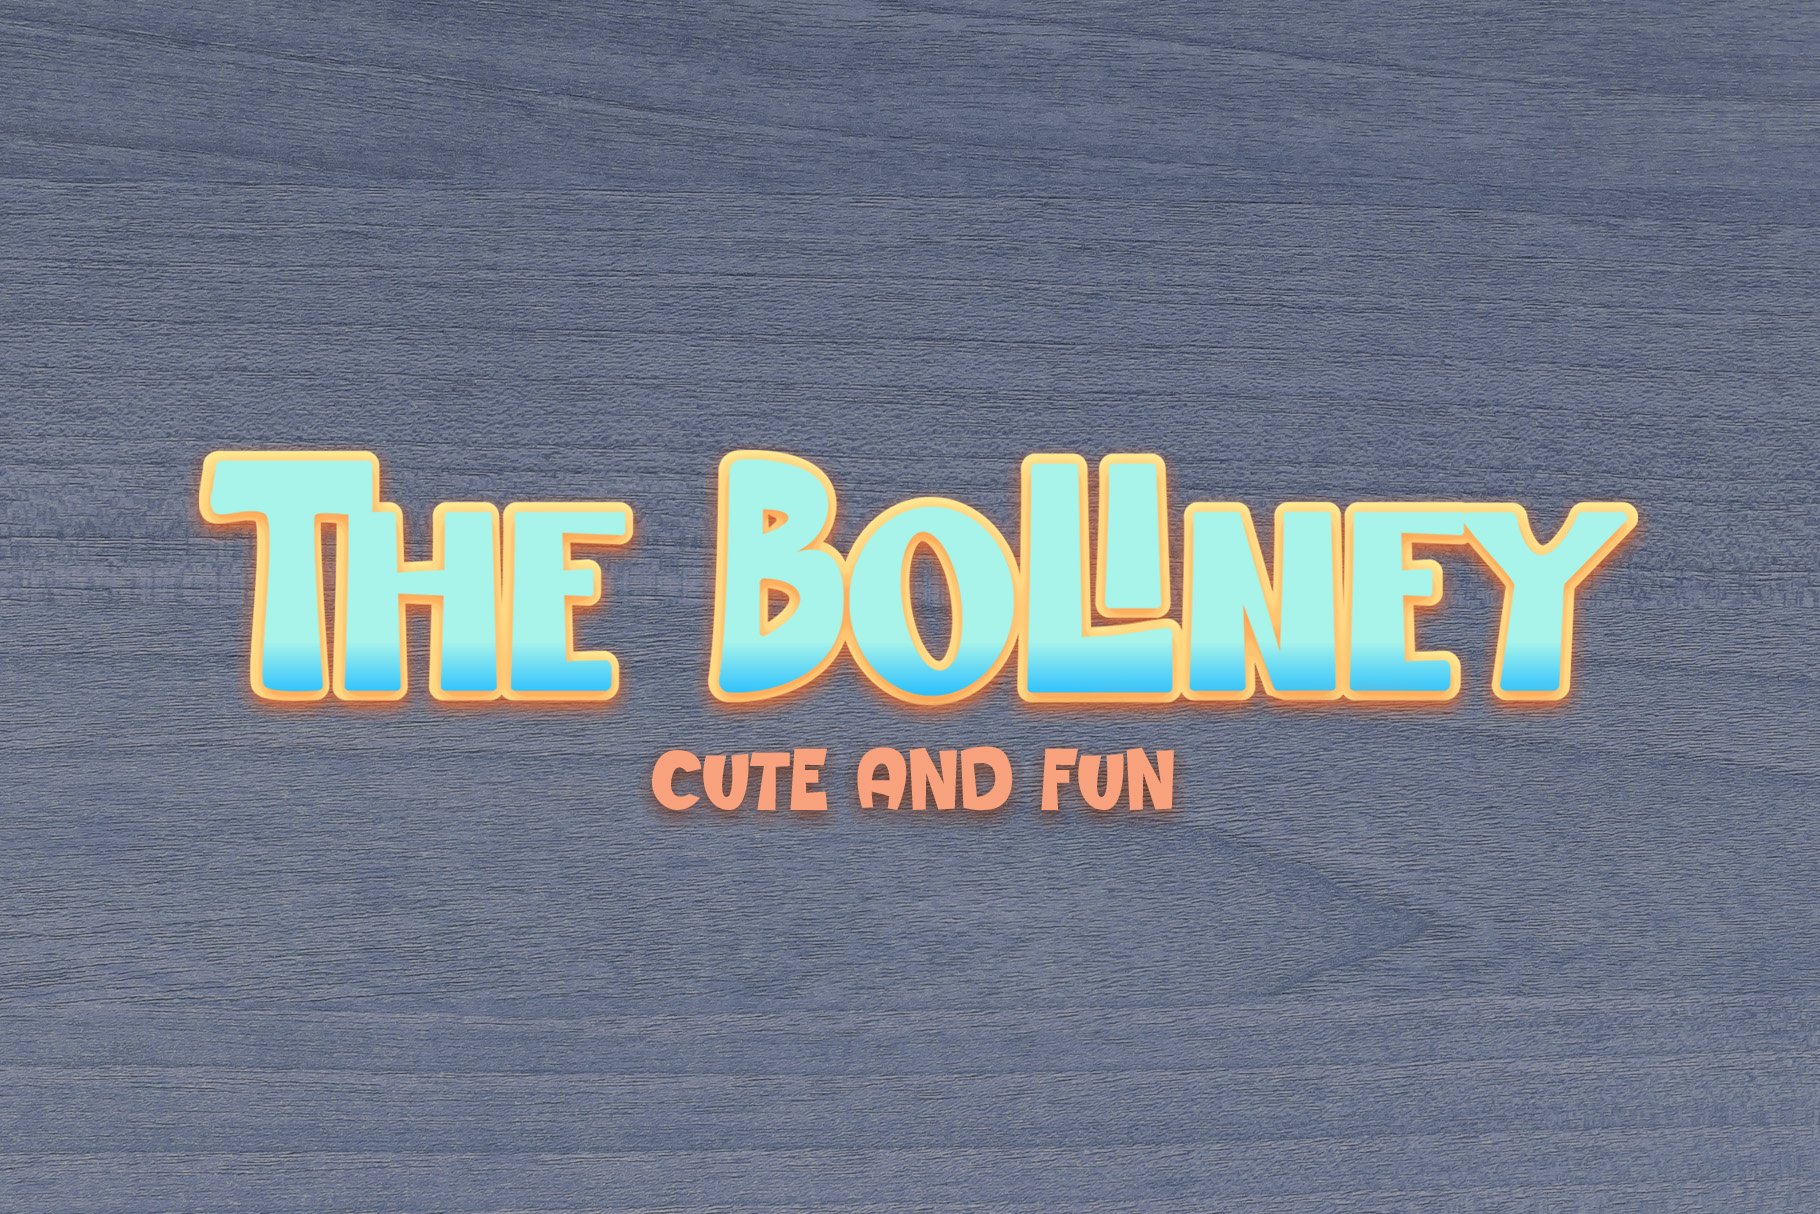 The Boliney - Display Font cover image.